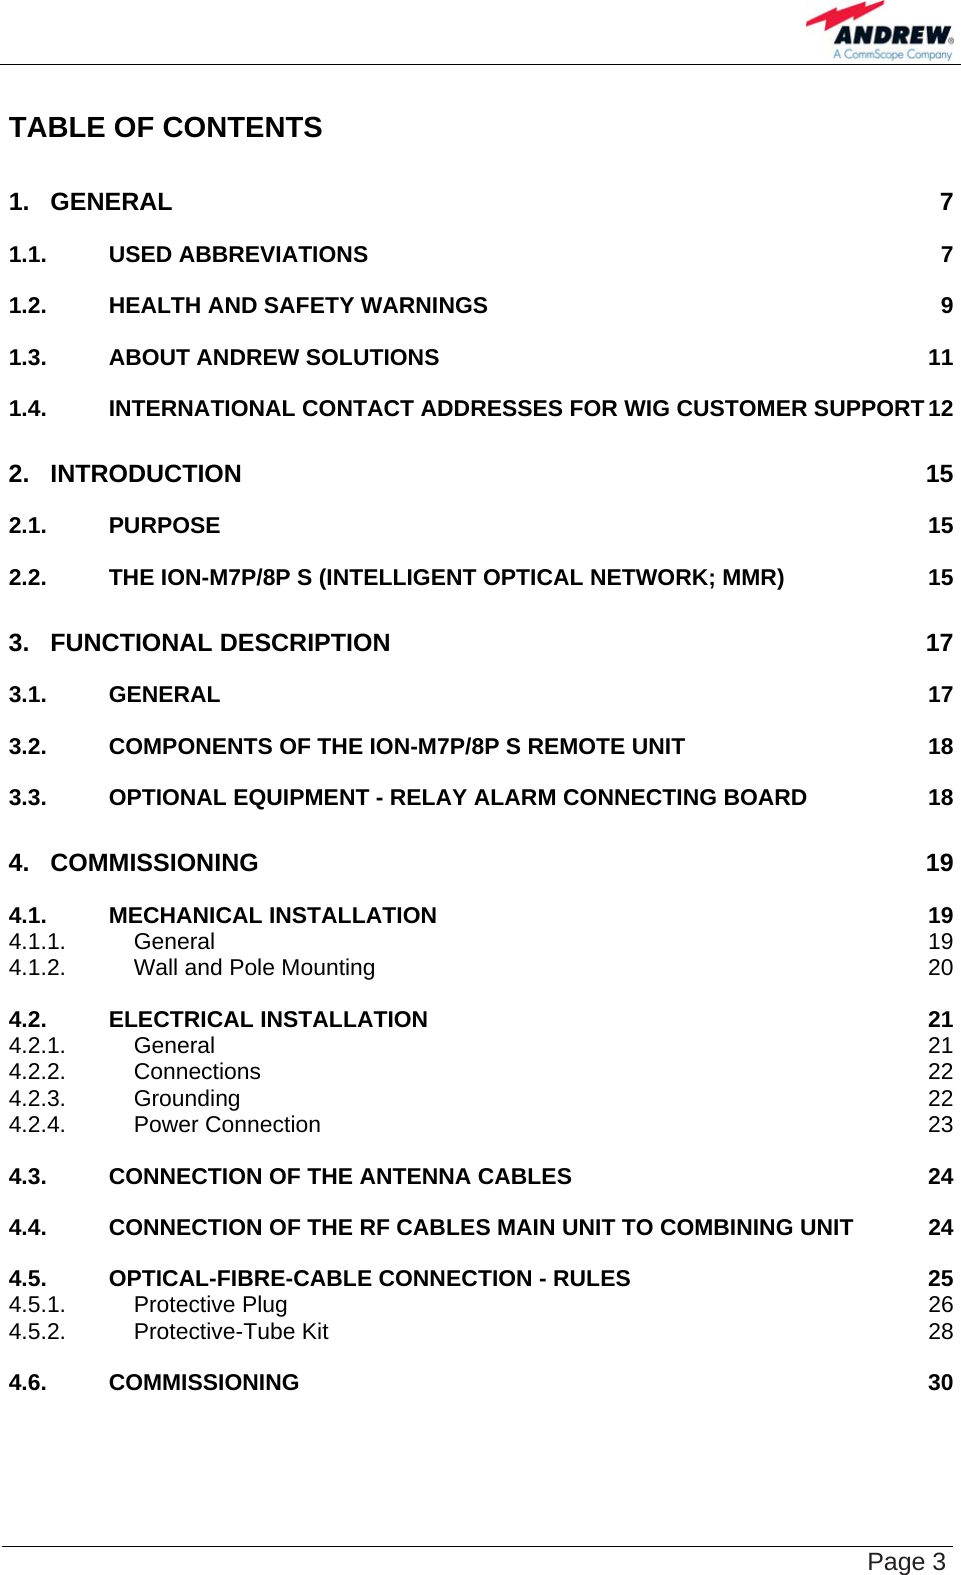    Page 3 TABLE OF CONTENTS 1. GENERAL 7 1.1. USED ABBREVIATIONS  7 1.2. HEALTH AND SAFETY WARNINGS  9 1.3. ABOUT ANDREW SOLUTIONS  11 1.4. INTERNATIONAL CONTACT ADDRESSES FOR WIG CUSTOMER SUPPORT 12 2. INTRODUCTION 15 2.1. PURPOSE 15 2.2. THE ION-M7P/8P S (INTELLIGENT OPTICAL NETWORK; MMR)  15 3. FUNCTIONAL DESCRIPTION  17 3.1. GENERAL 17 3.2. COMPONENTS OF THE ION-M7P/8P S REMOTE UNIT  18 3.3. OPTIONAL EQUIPMENT - RELAY ALARM CONNECTING BOARD  18 4. COMMISSIONING 19 4.1. MECHANICAL INSTALLATION  19 4.1.1. General 19 4.1.2. Wall and Pole Mounting  20 4.2. ELECTRICAL INSTALLATION  21 4.2.1. General 21 4.2.2. Connections 22 4.2.3. Grounding 22 4.2.4. Power Connection  23 4.3. CONNECTION OF THE ANTENNA CABLES  24 4.4. CONNECTION OF THE RF CABLES MAIN UNIT TO COMBINING UNIT  24 4.5. OPTICAL-FIBRE-CABLE CONNECTION - RULES  25 4.5.1. Protective Plug  26 4.5.2. Protective-Tube Kit  28 4.6. COMMISSIONING 30 